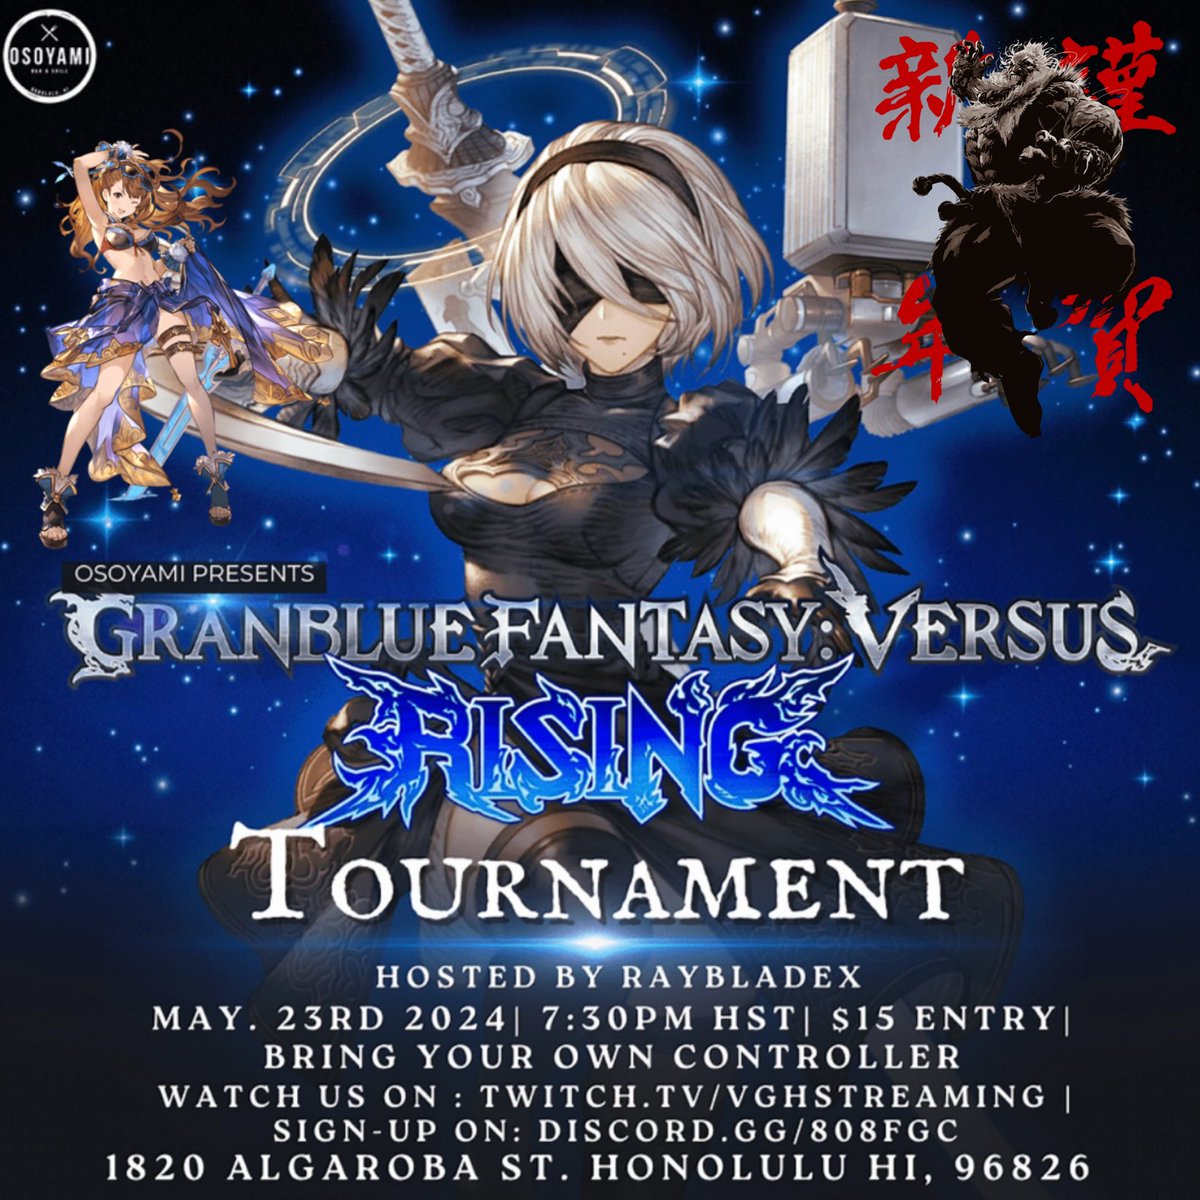 Tonight, we’ll be hosting a Granblue Fantasy Versus Rising tournament at @osoyami808 - Beatrix will be tournament legal! Also, come check out Akuma and the latest #sf6 balance changes during casual play! #808fgc